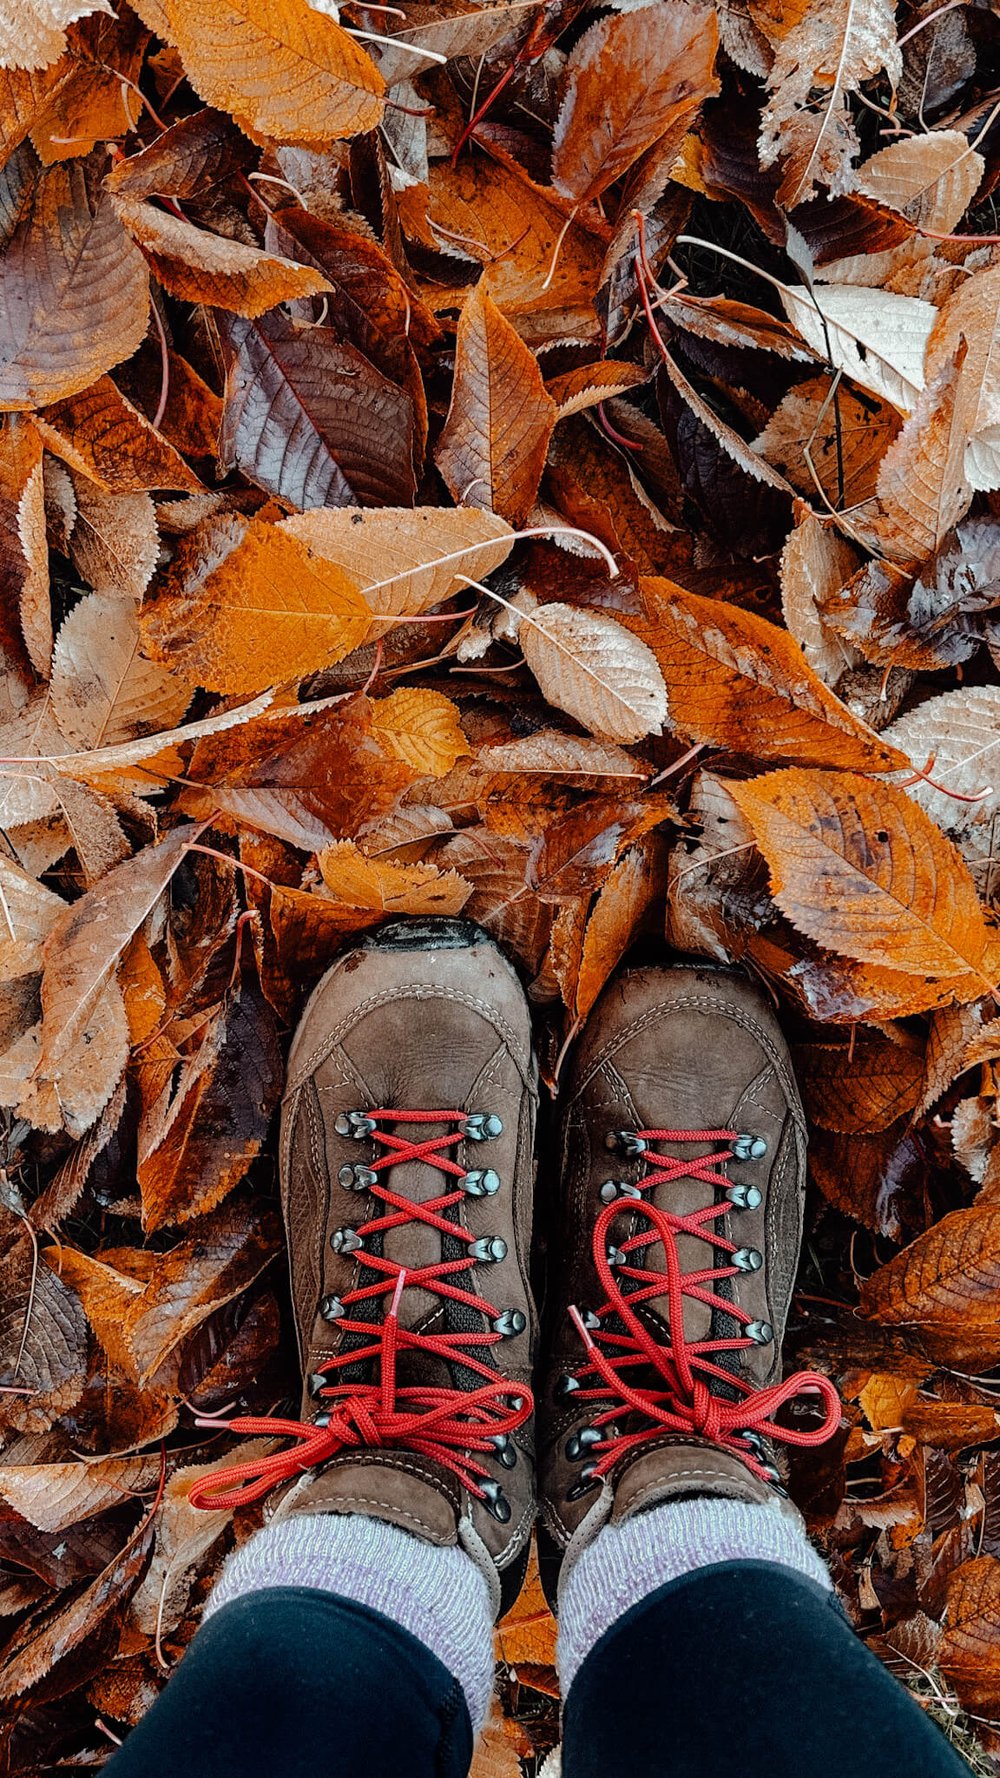 Scotland weather in October - Aviemore, Cairngorms and crunchy leaves.jpg